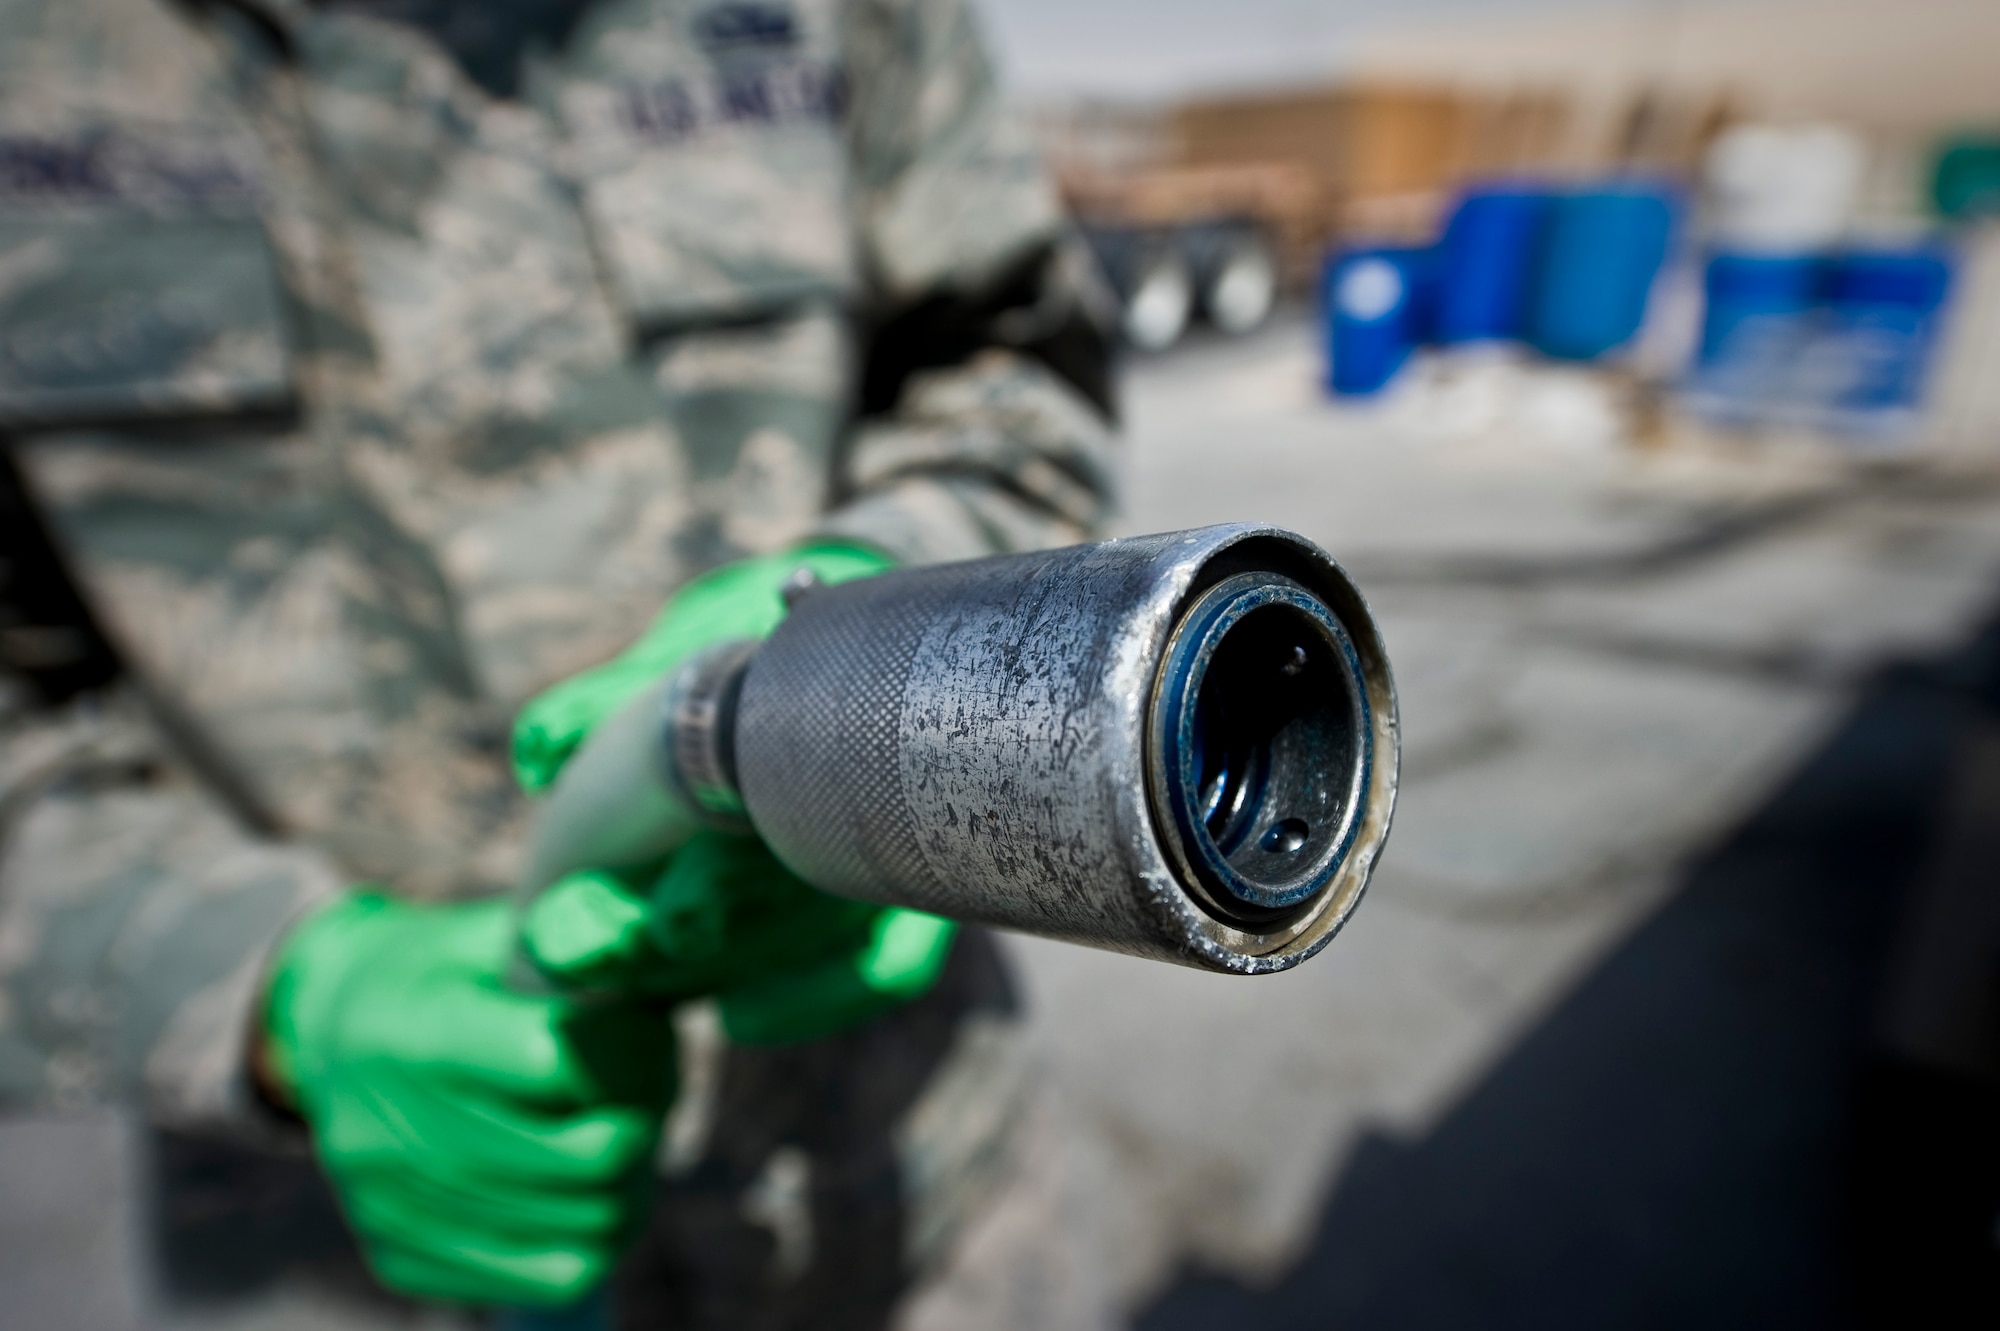 Tech. Sgt. Christopher Breski inspects a hose used by the lavatory service truck during aircraft waste recovery at the 379th Air Expeditionary Wing in Southwest Asia, July 22, 2013. Breski is the 8th Expeditionary Air Mobility Squadron fleet services NCO in charge deployed from Joint Base McGuire-Dix-Lakehurst, N.J. (U.S. Air Force photo/Senior Airman Benjamin Stratton)